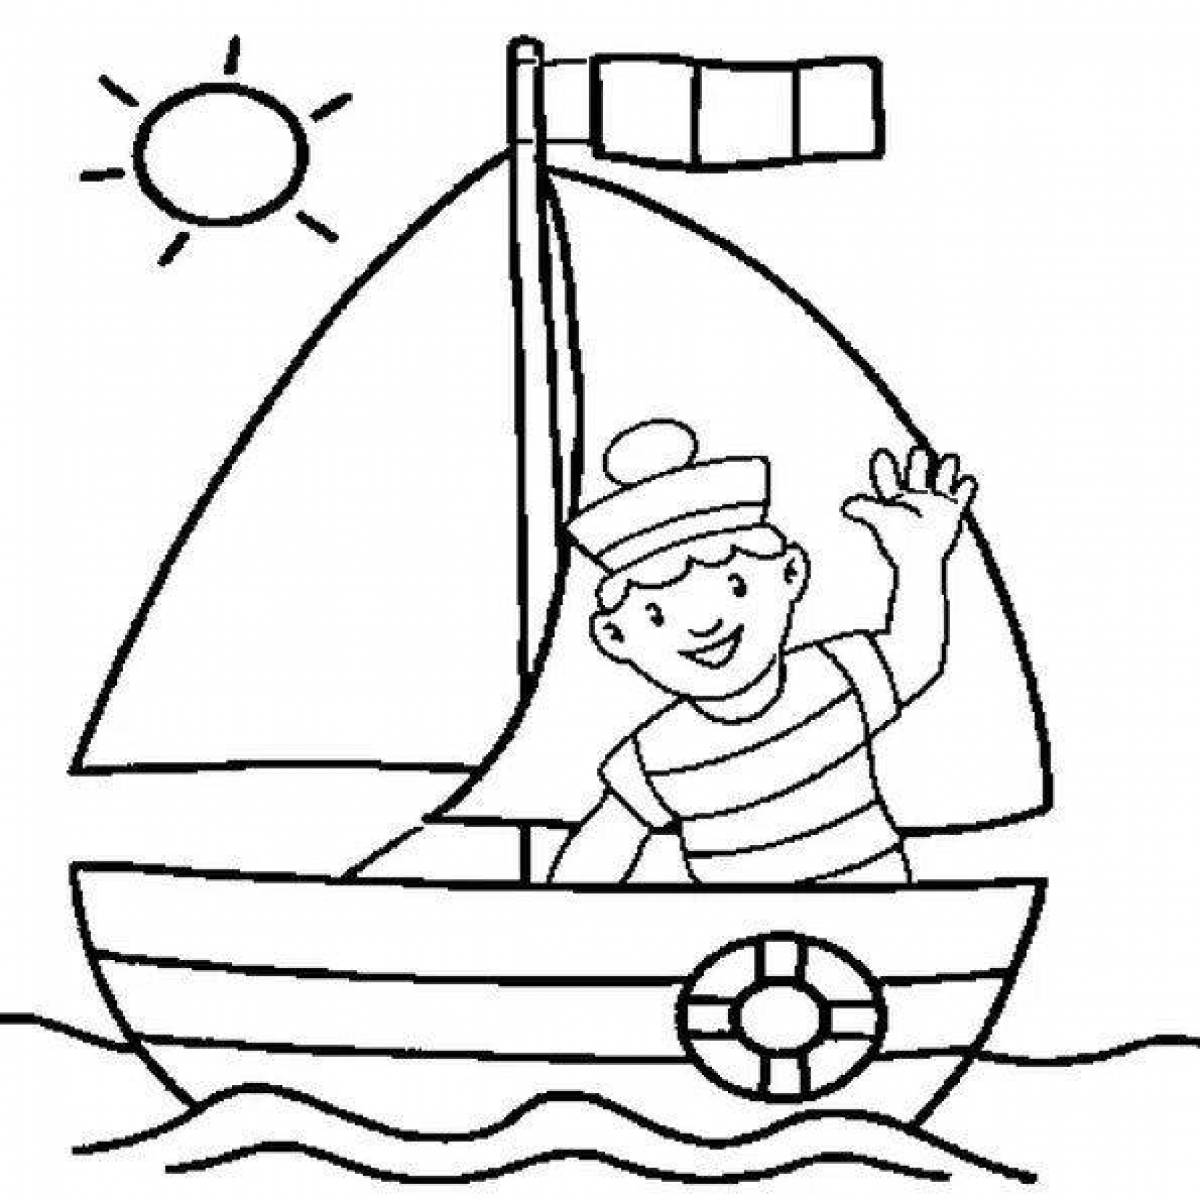 Colorful-sailor-sketch-sailor coloring pages for kids